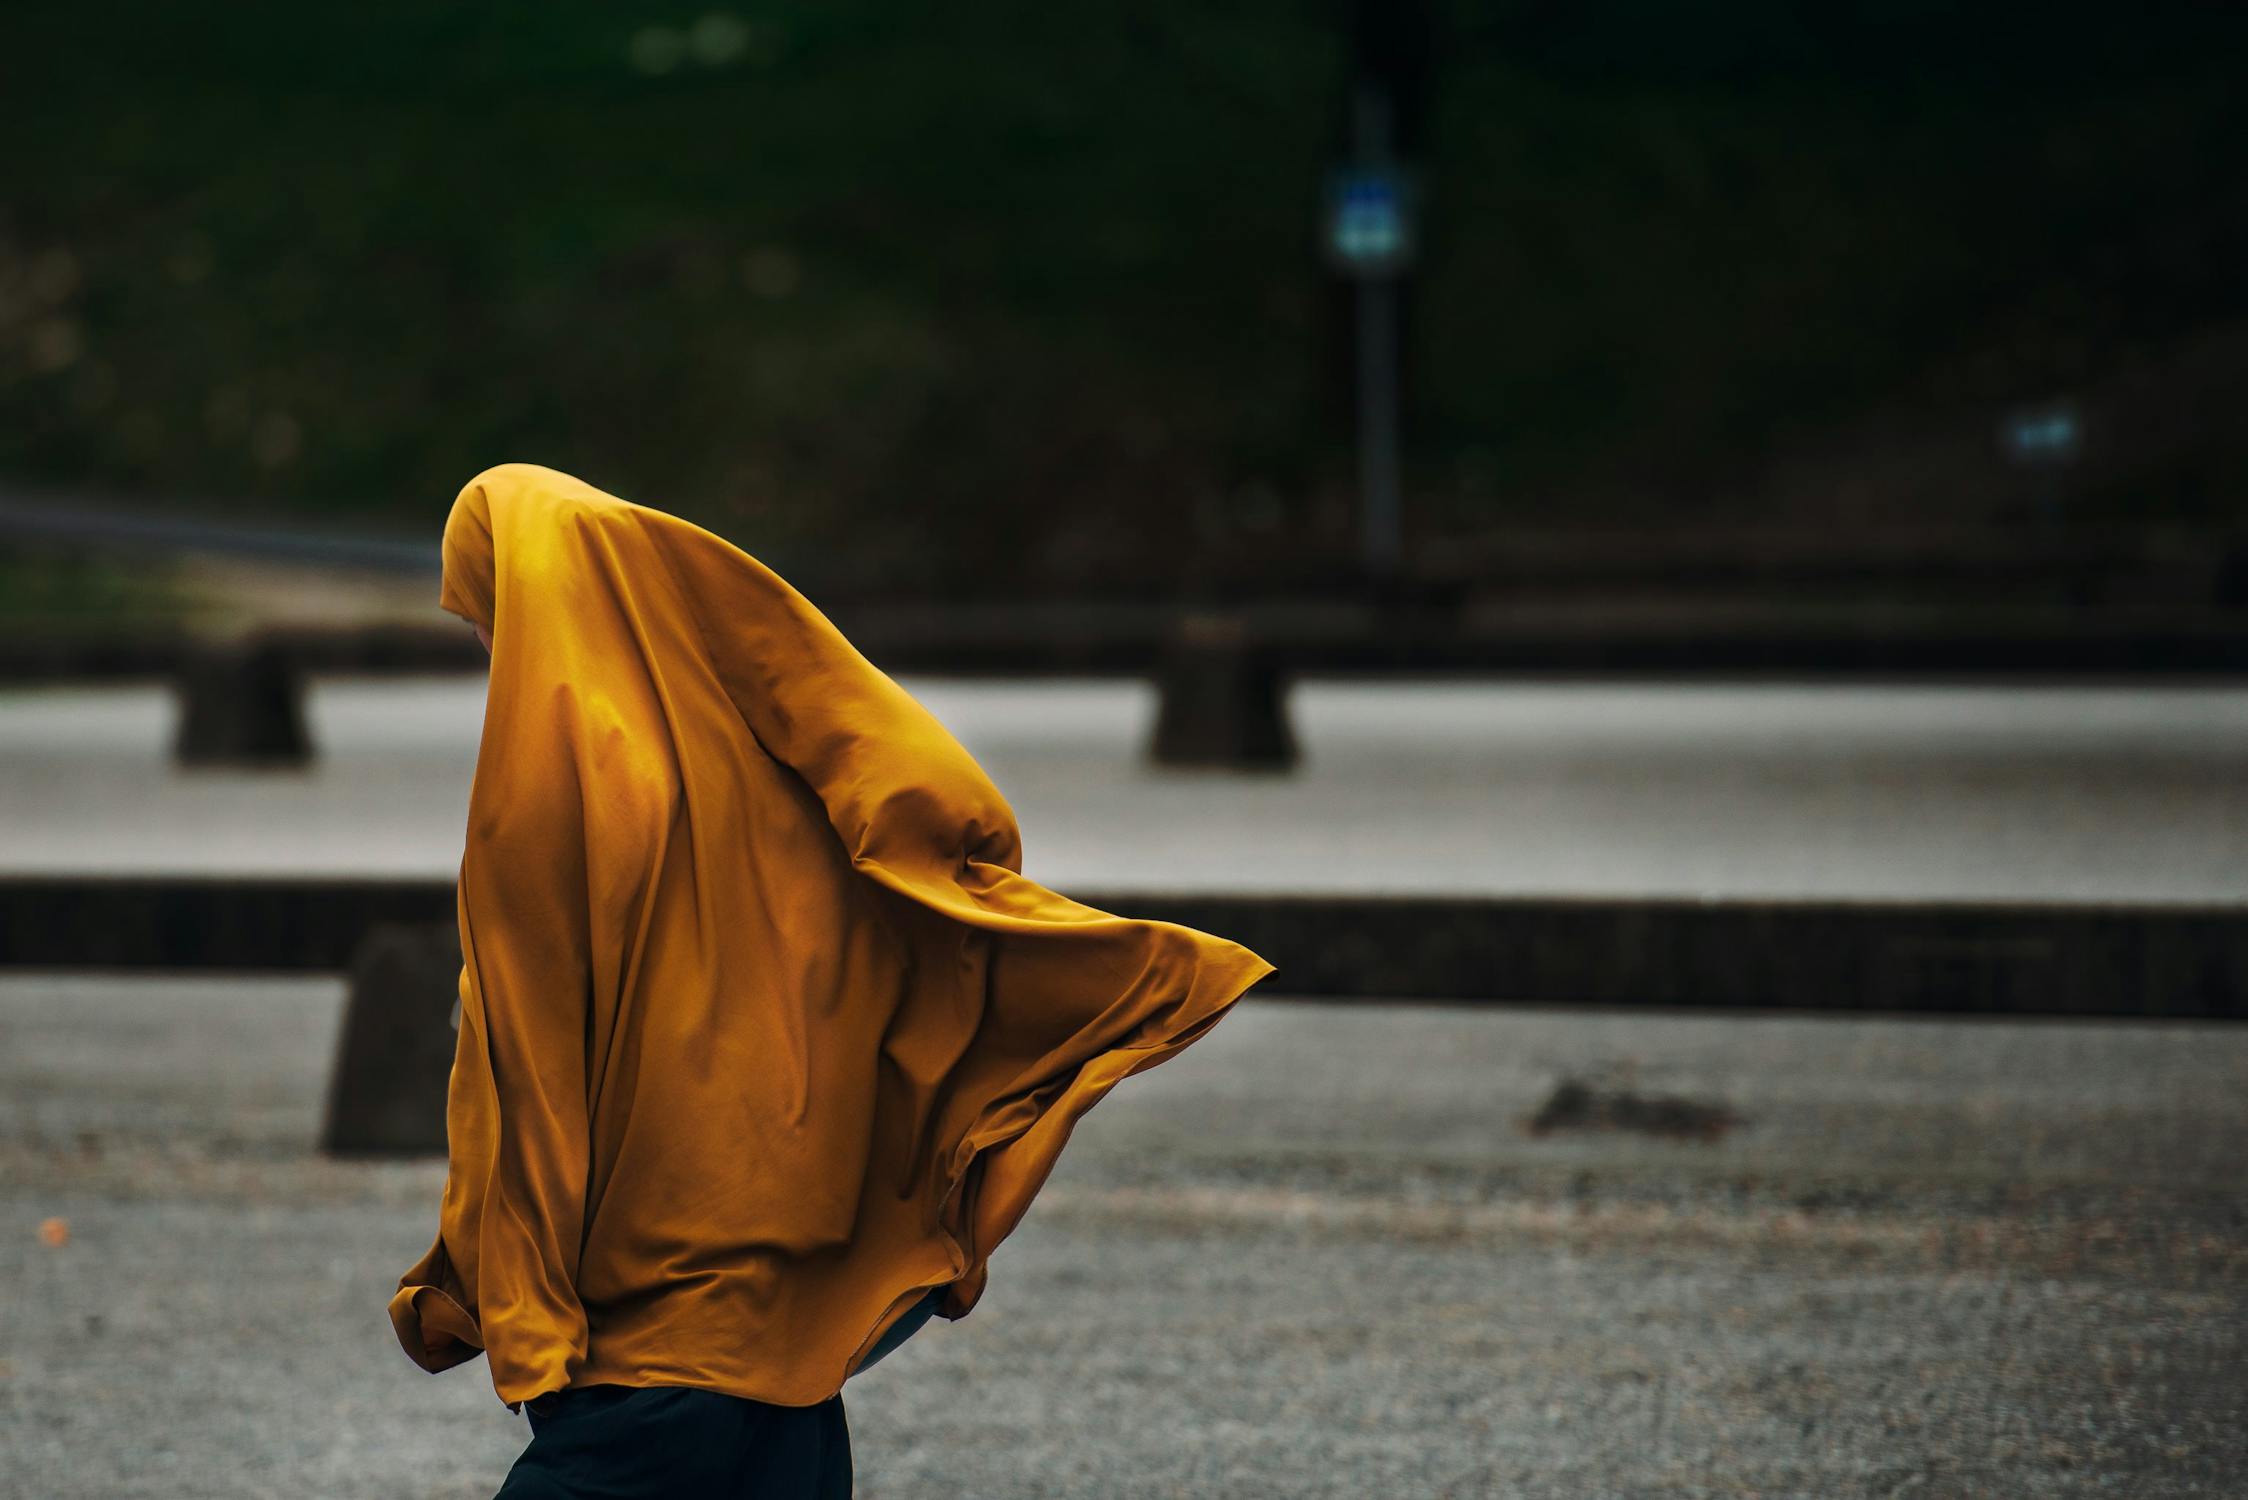 Muslim Fruad Photo by Janko Ferlic from Pexels: https://www.pexels.com/photo/person-covered-with-yellow-blanket-590491/